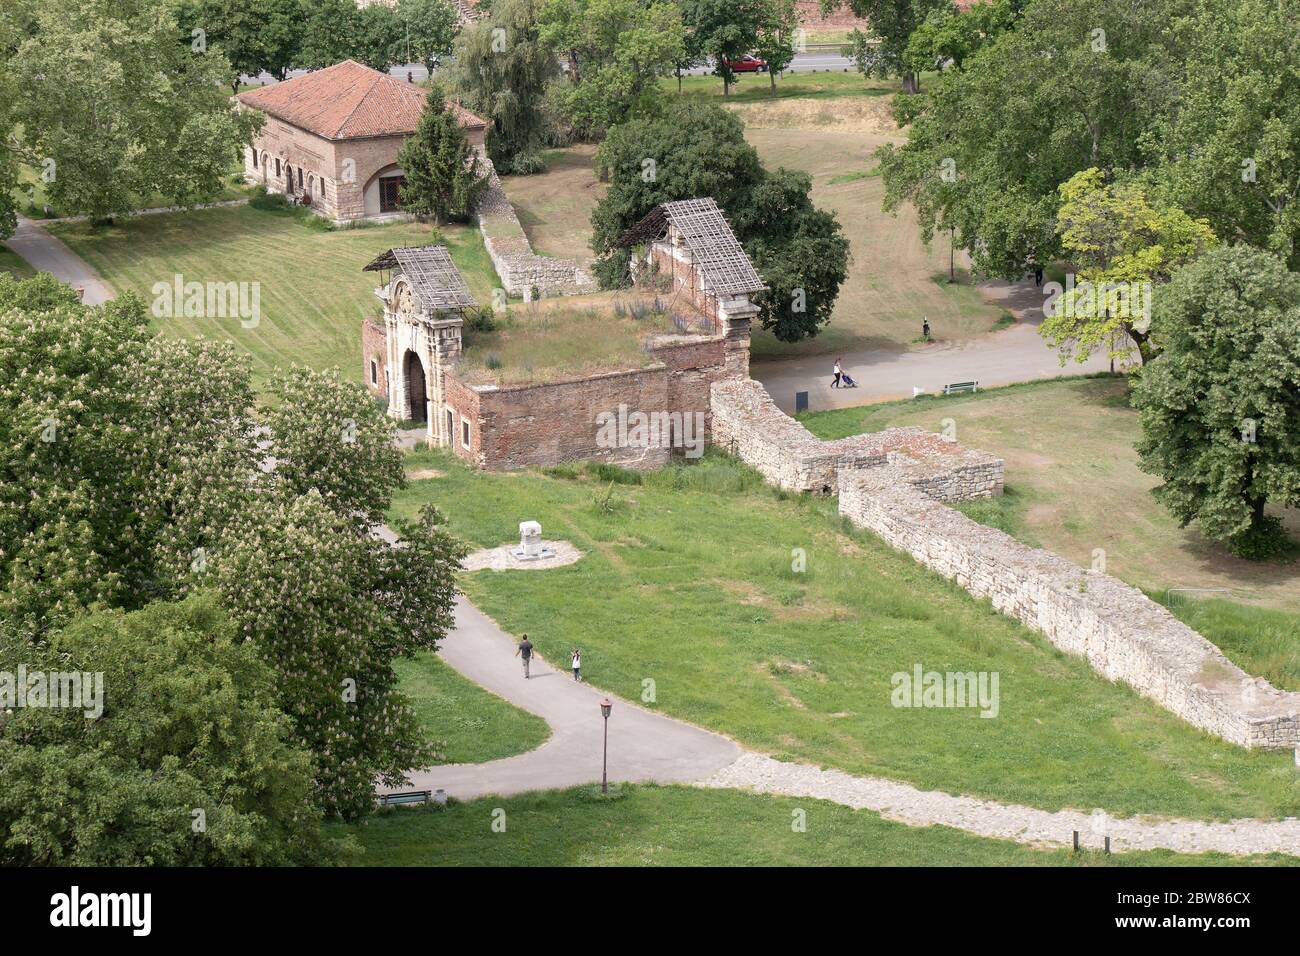 Belgrade, Serbia - May 12, 2020: Kalemegdan park, its lower town with ruins from roman and medieval times, and remains of Charles VI gate, from 1736, Stock Photo